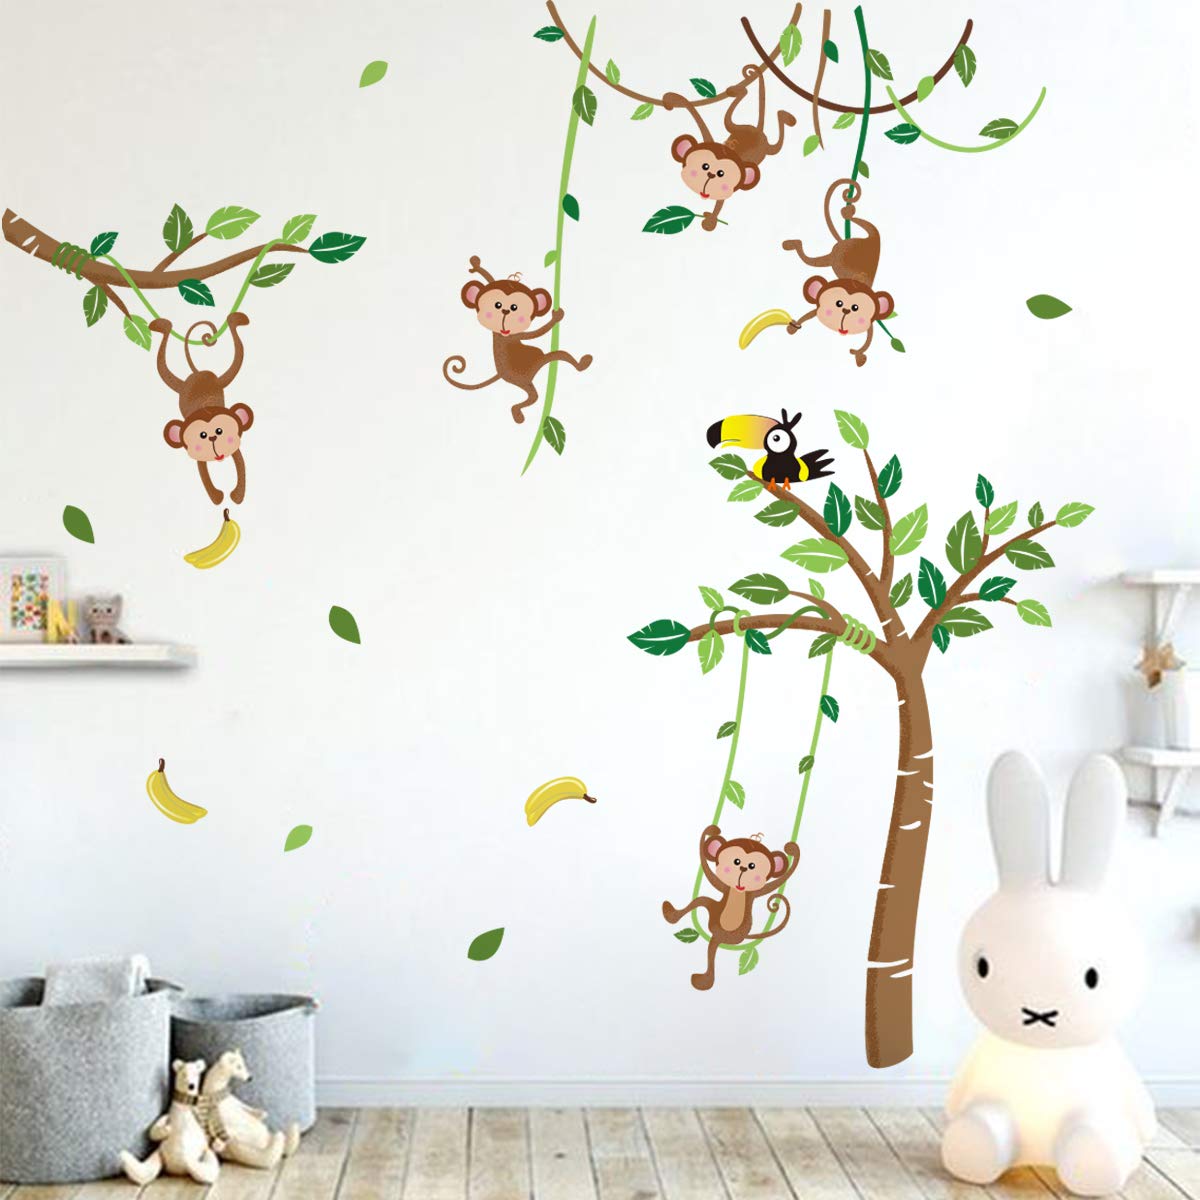 Runtoo Monkey and Tree Wall Decals Animals Jungle Wall Stickers TV Wall Décor for Baby Nursery Kids Bedroom